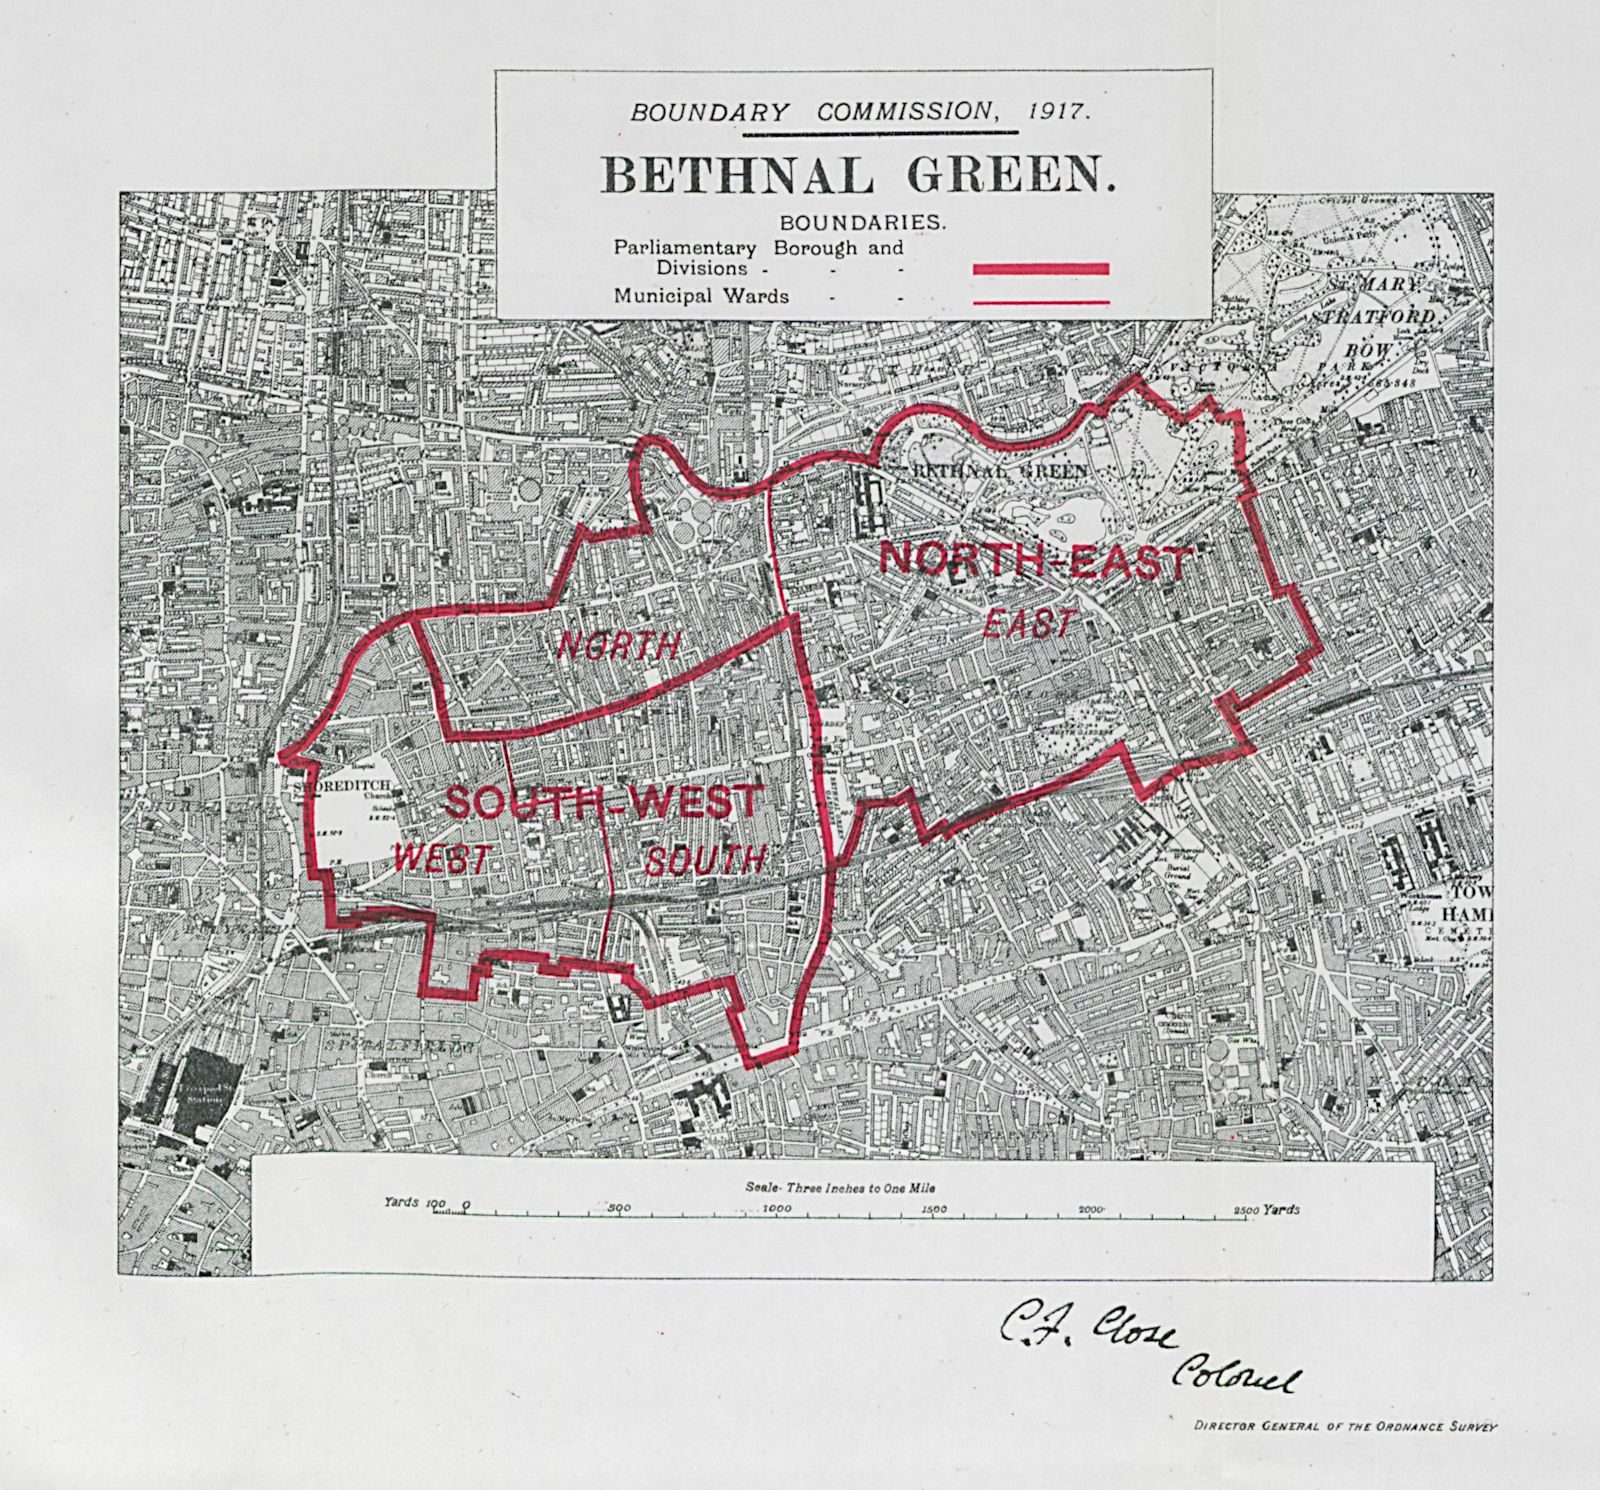 Bethnal Green Parliamentary Borough. Shoreditch. BOUNDARY COMMISSION 1917 map